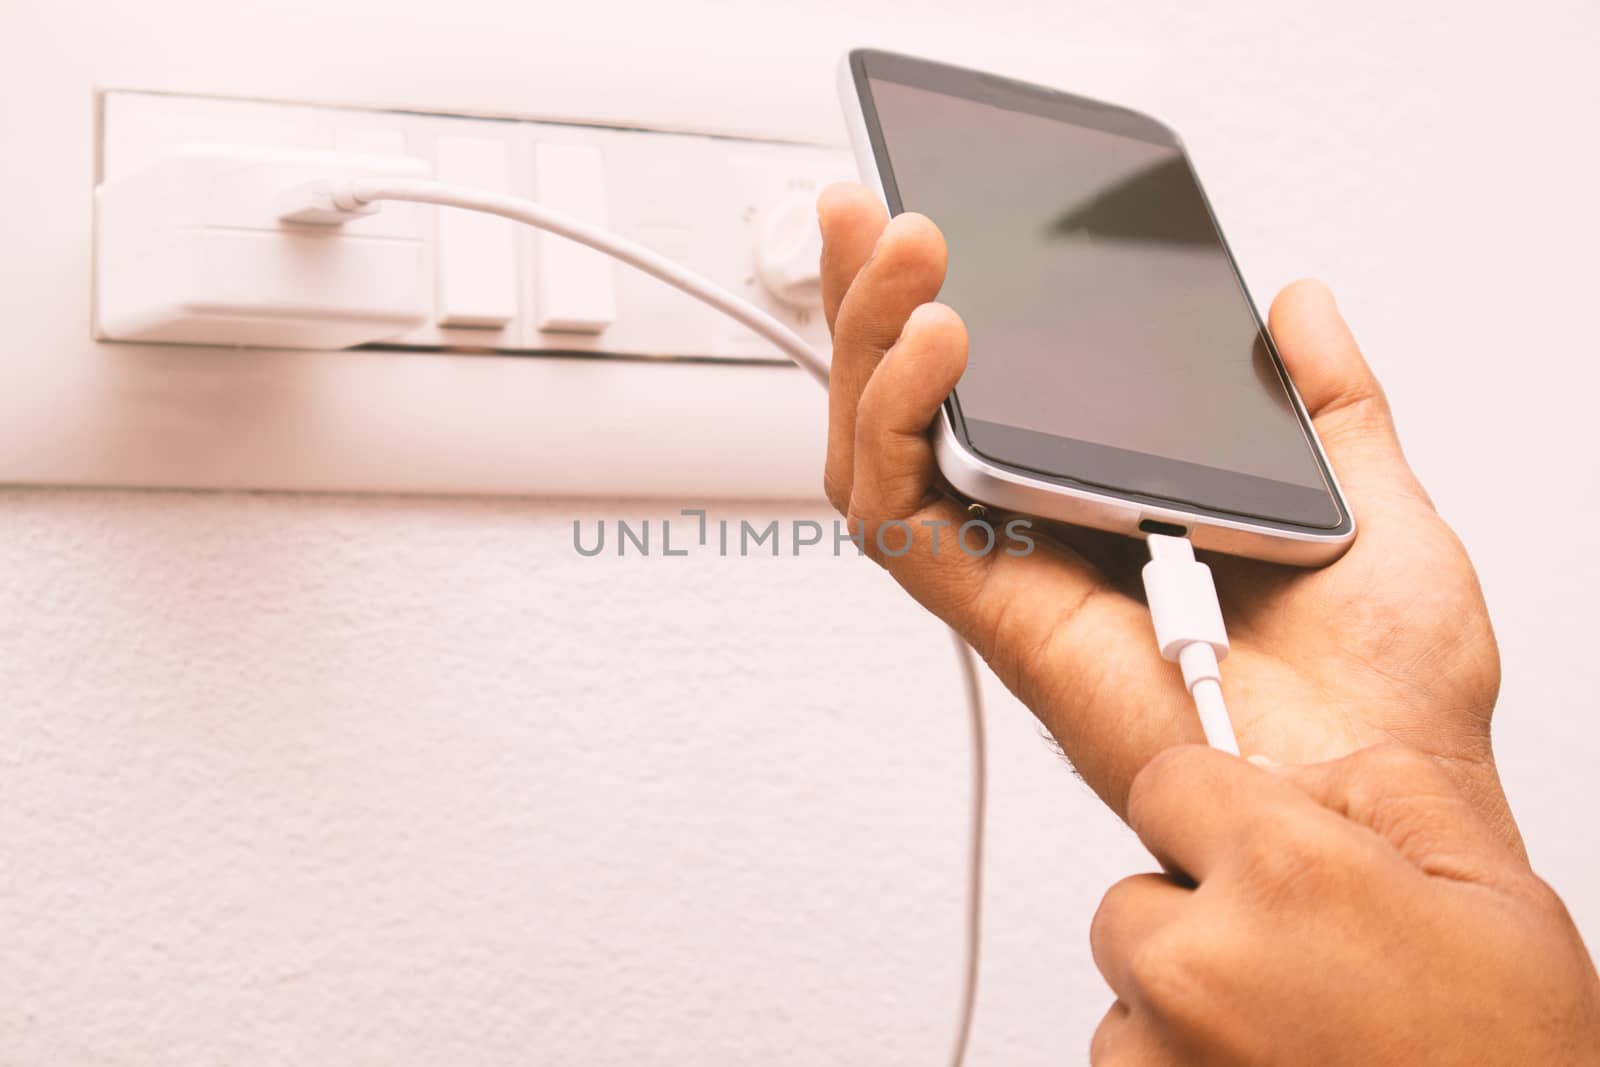 Maski, India 18,January 2020 - Hand holding smartphone and connecting USB type C charger cable to mobile for charging